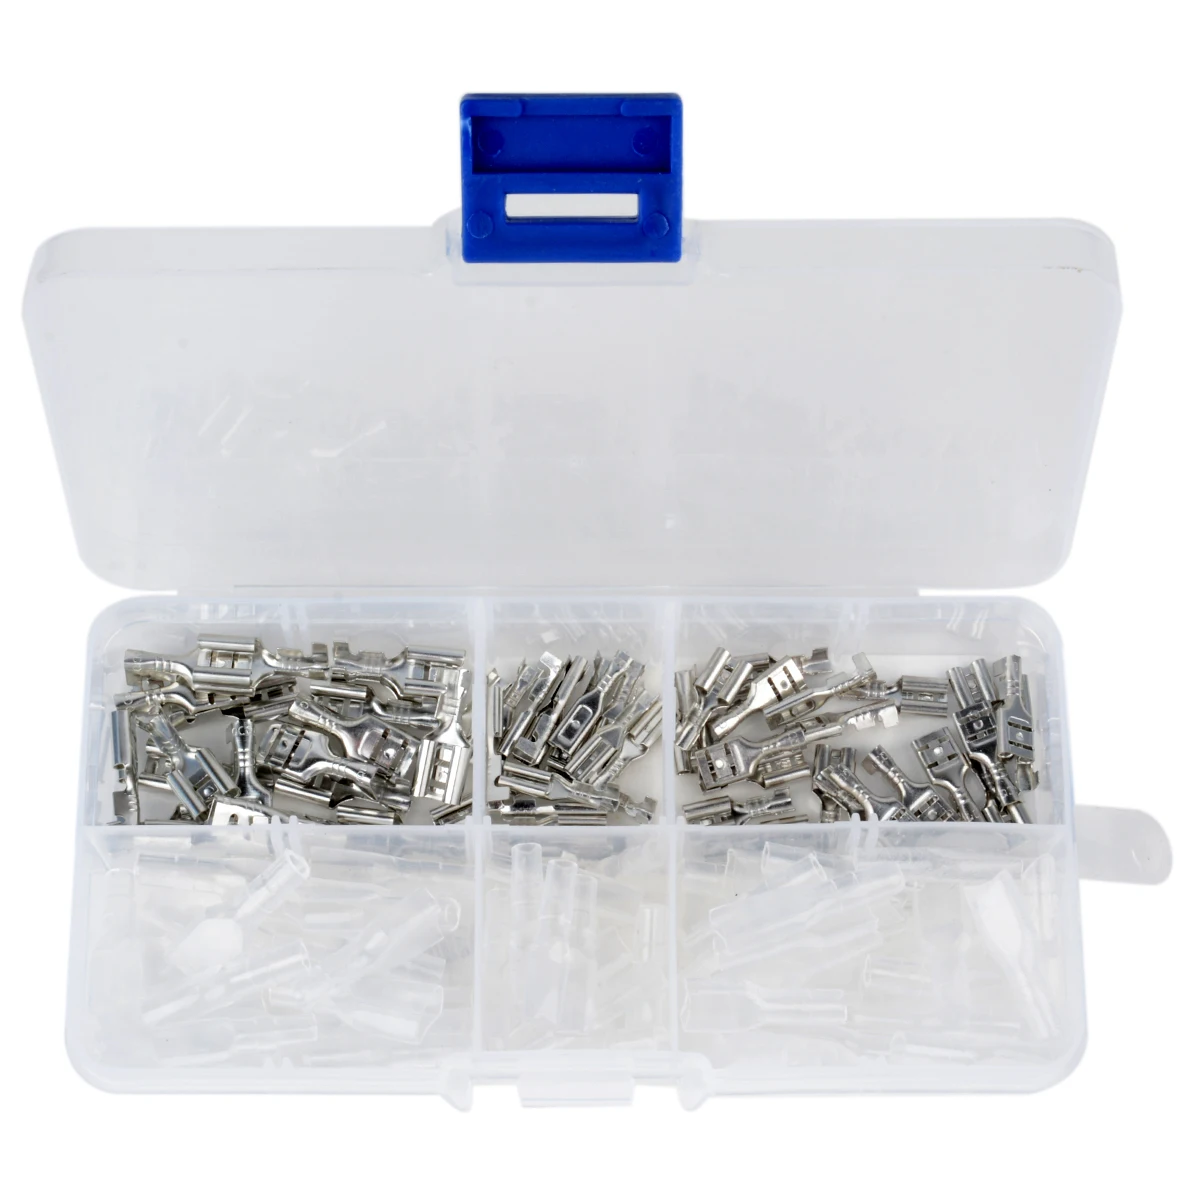 

120pcs/Set 2.8mm 4.8mm 6.3mm Female Spade Connectors High Quality Crimp Terminals with Insulating Sleeves